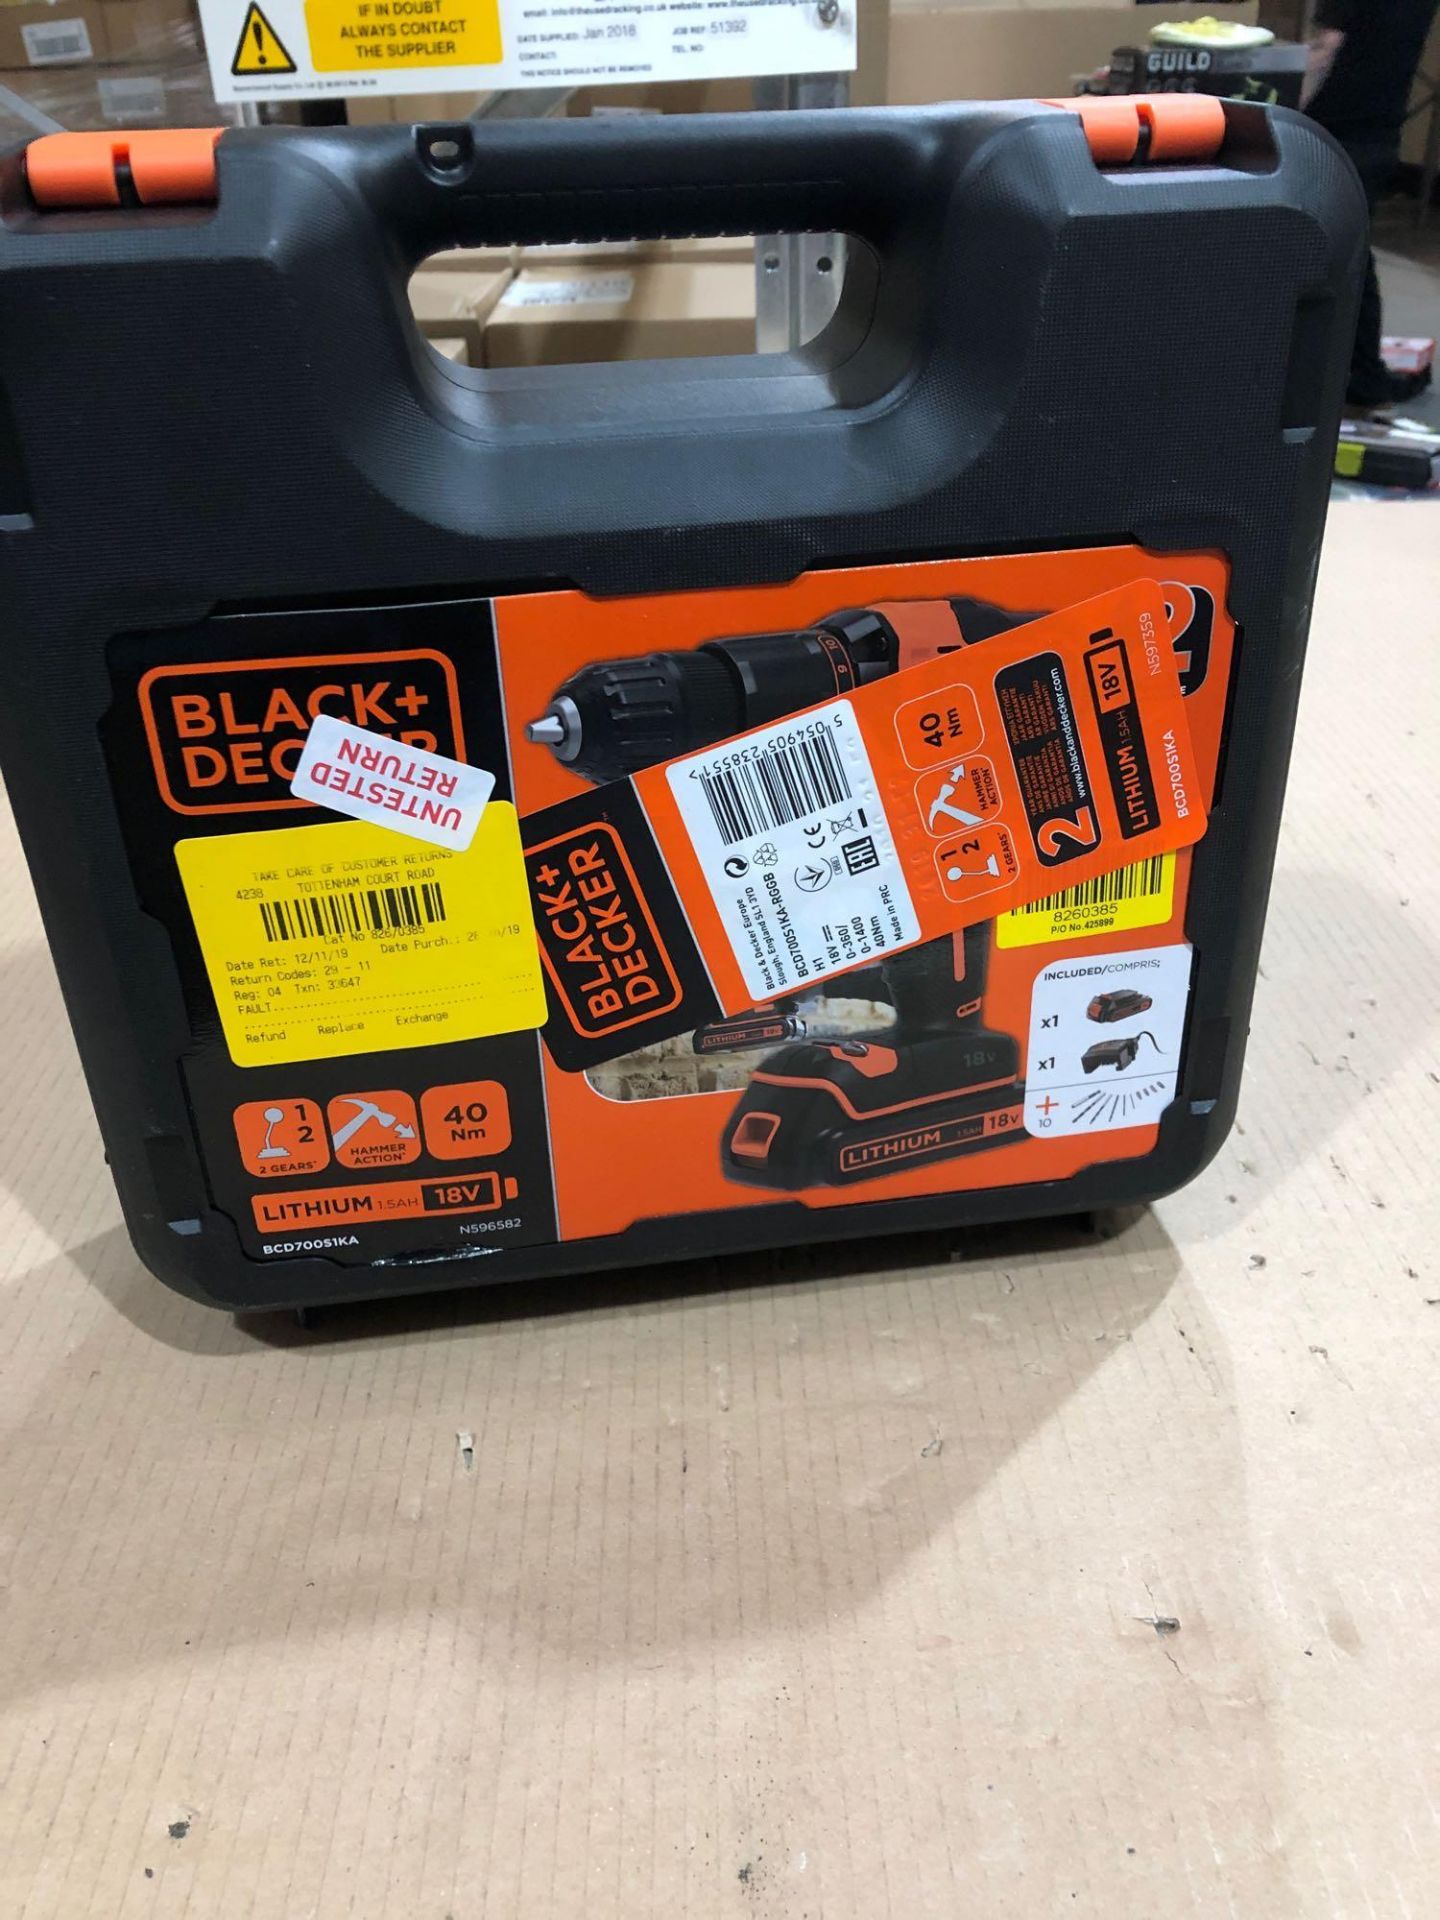 Black + Decker BCD700S1KA Hammer Drill with Battery - 18V £50.00 RRP - Image 6 of 8